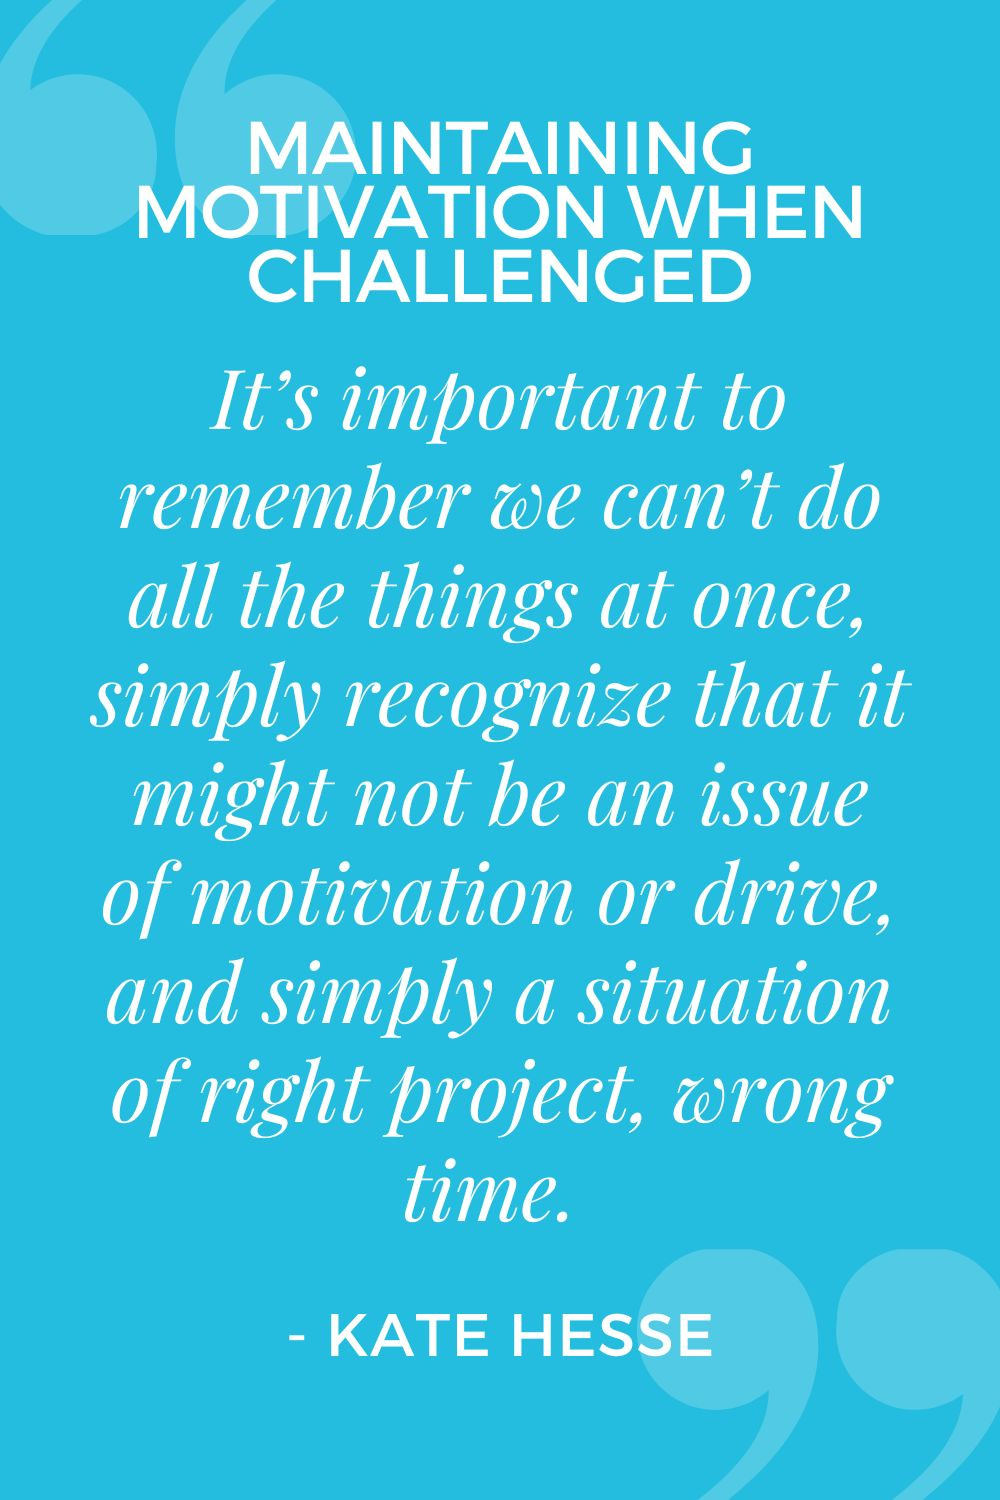 It's important to remember we can't do all the things at once, simply recognize that it might not be an issue of motivation or drive, and simply a situation of right project, wrong time.